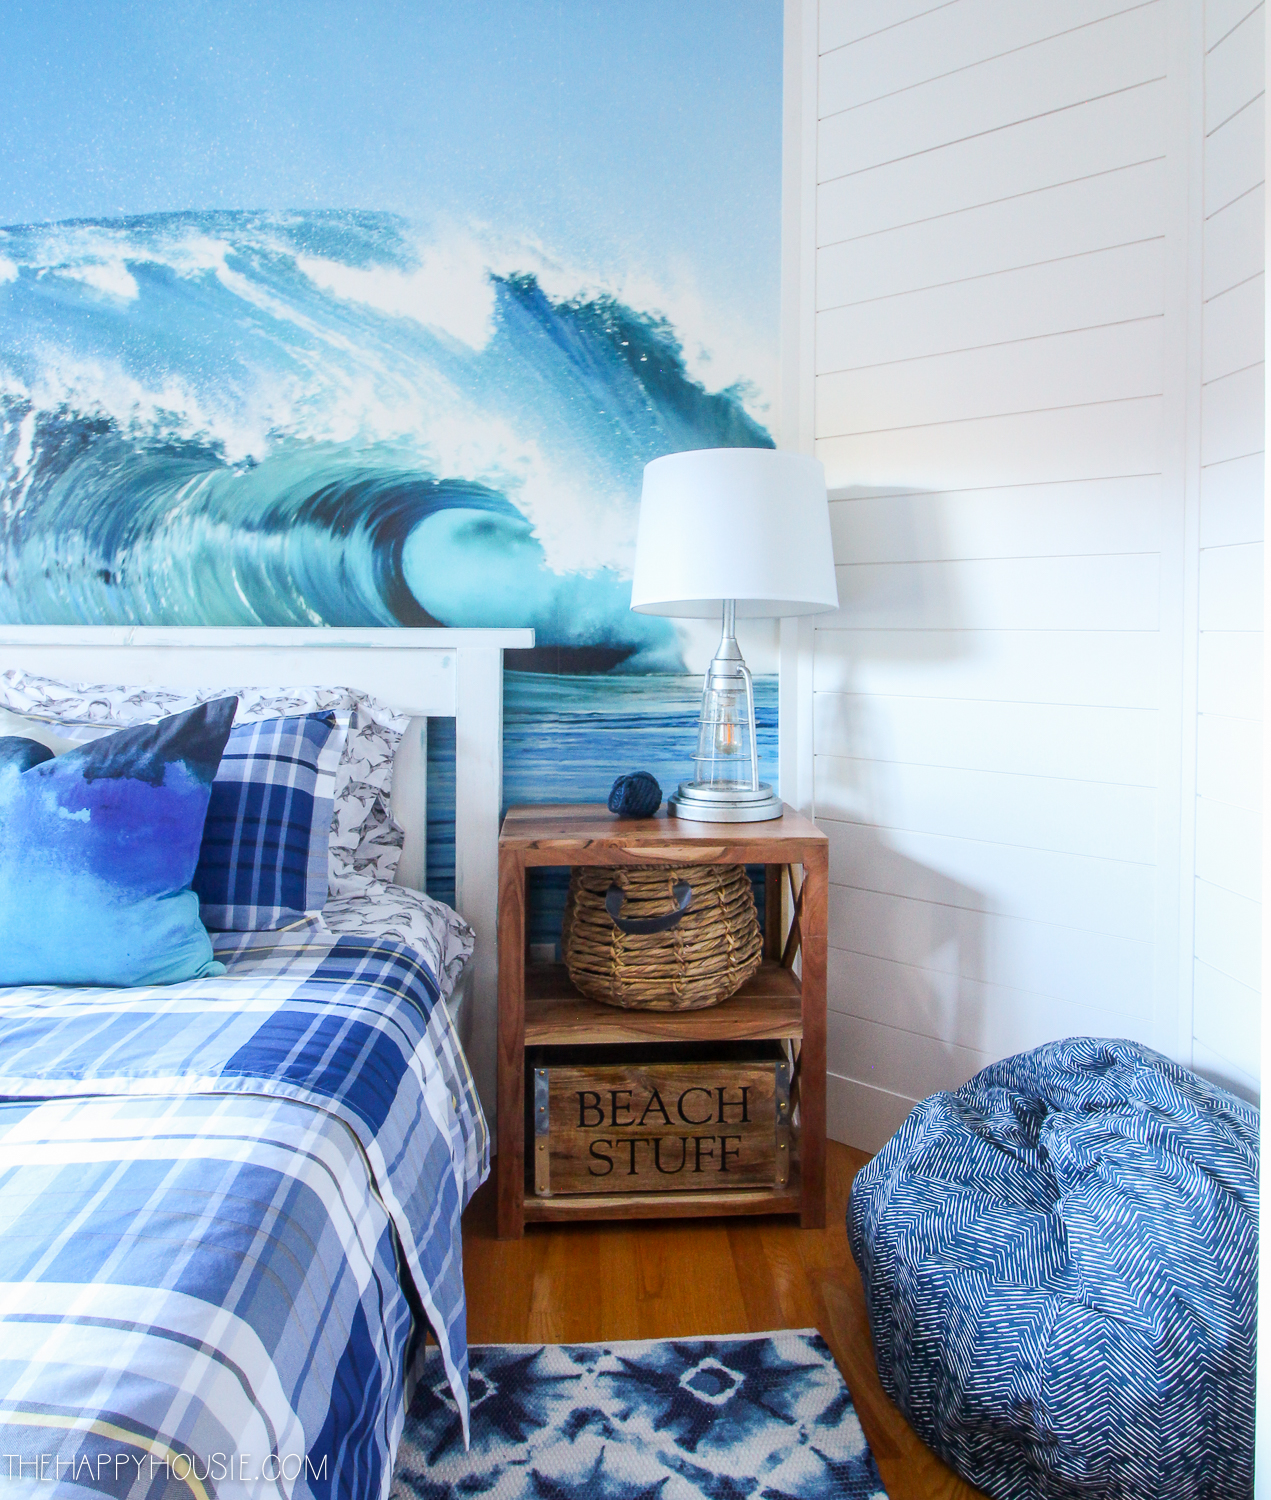 The room with a surf poster behind the bed.